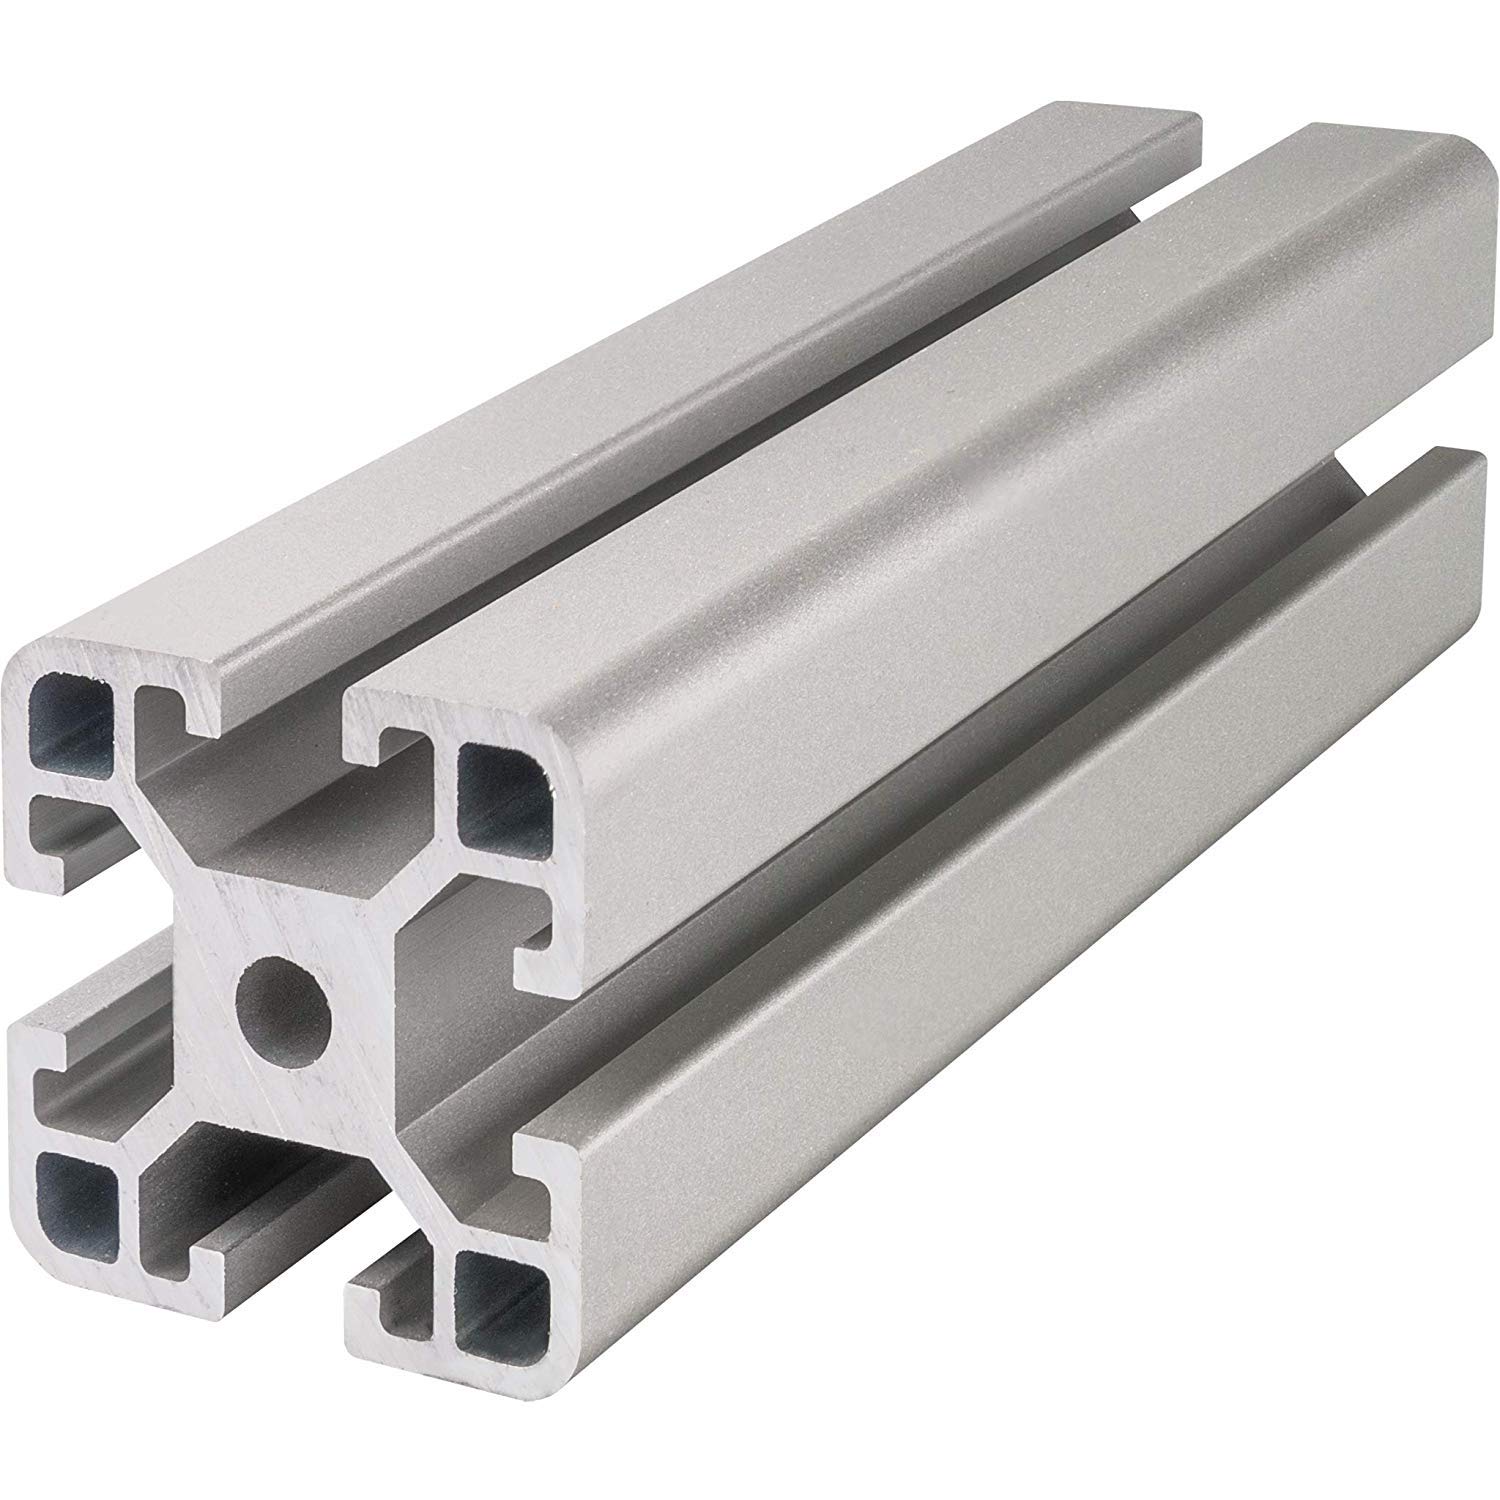 Aluminium Profile Manufacturer: A Guide to Choosing the Best One